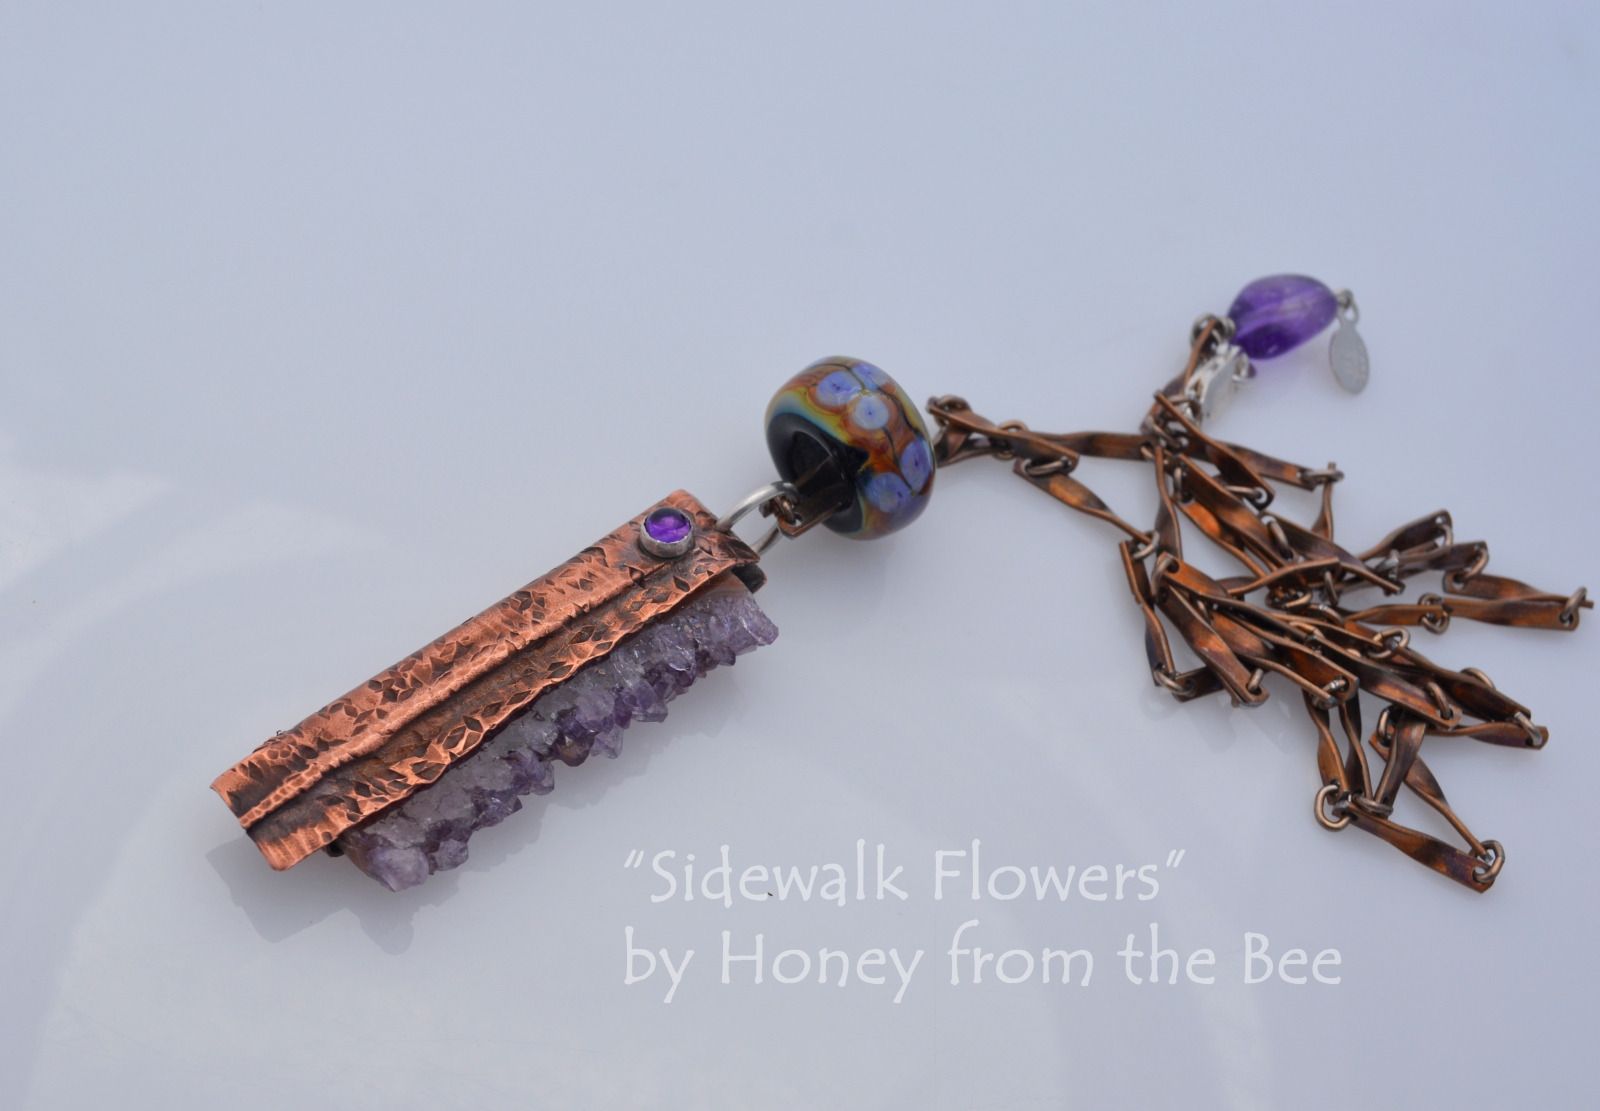 Amethyst and foldformed copper pendant by Honey from the Bee